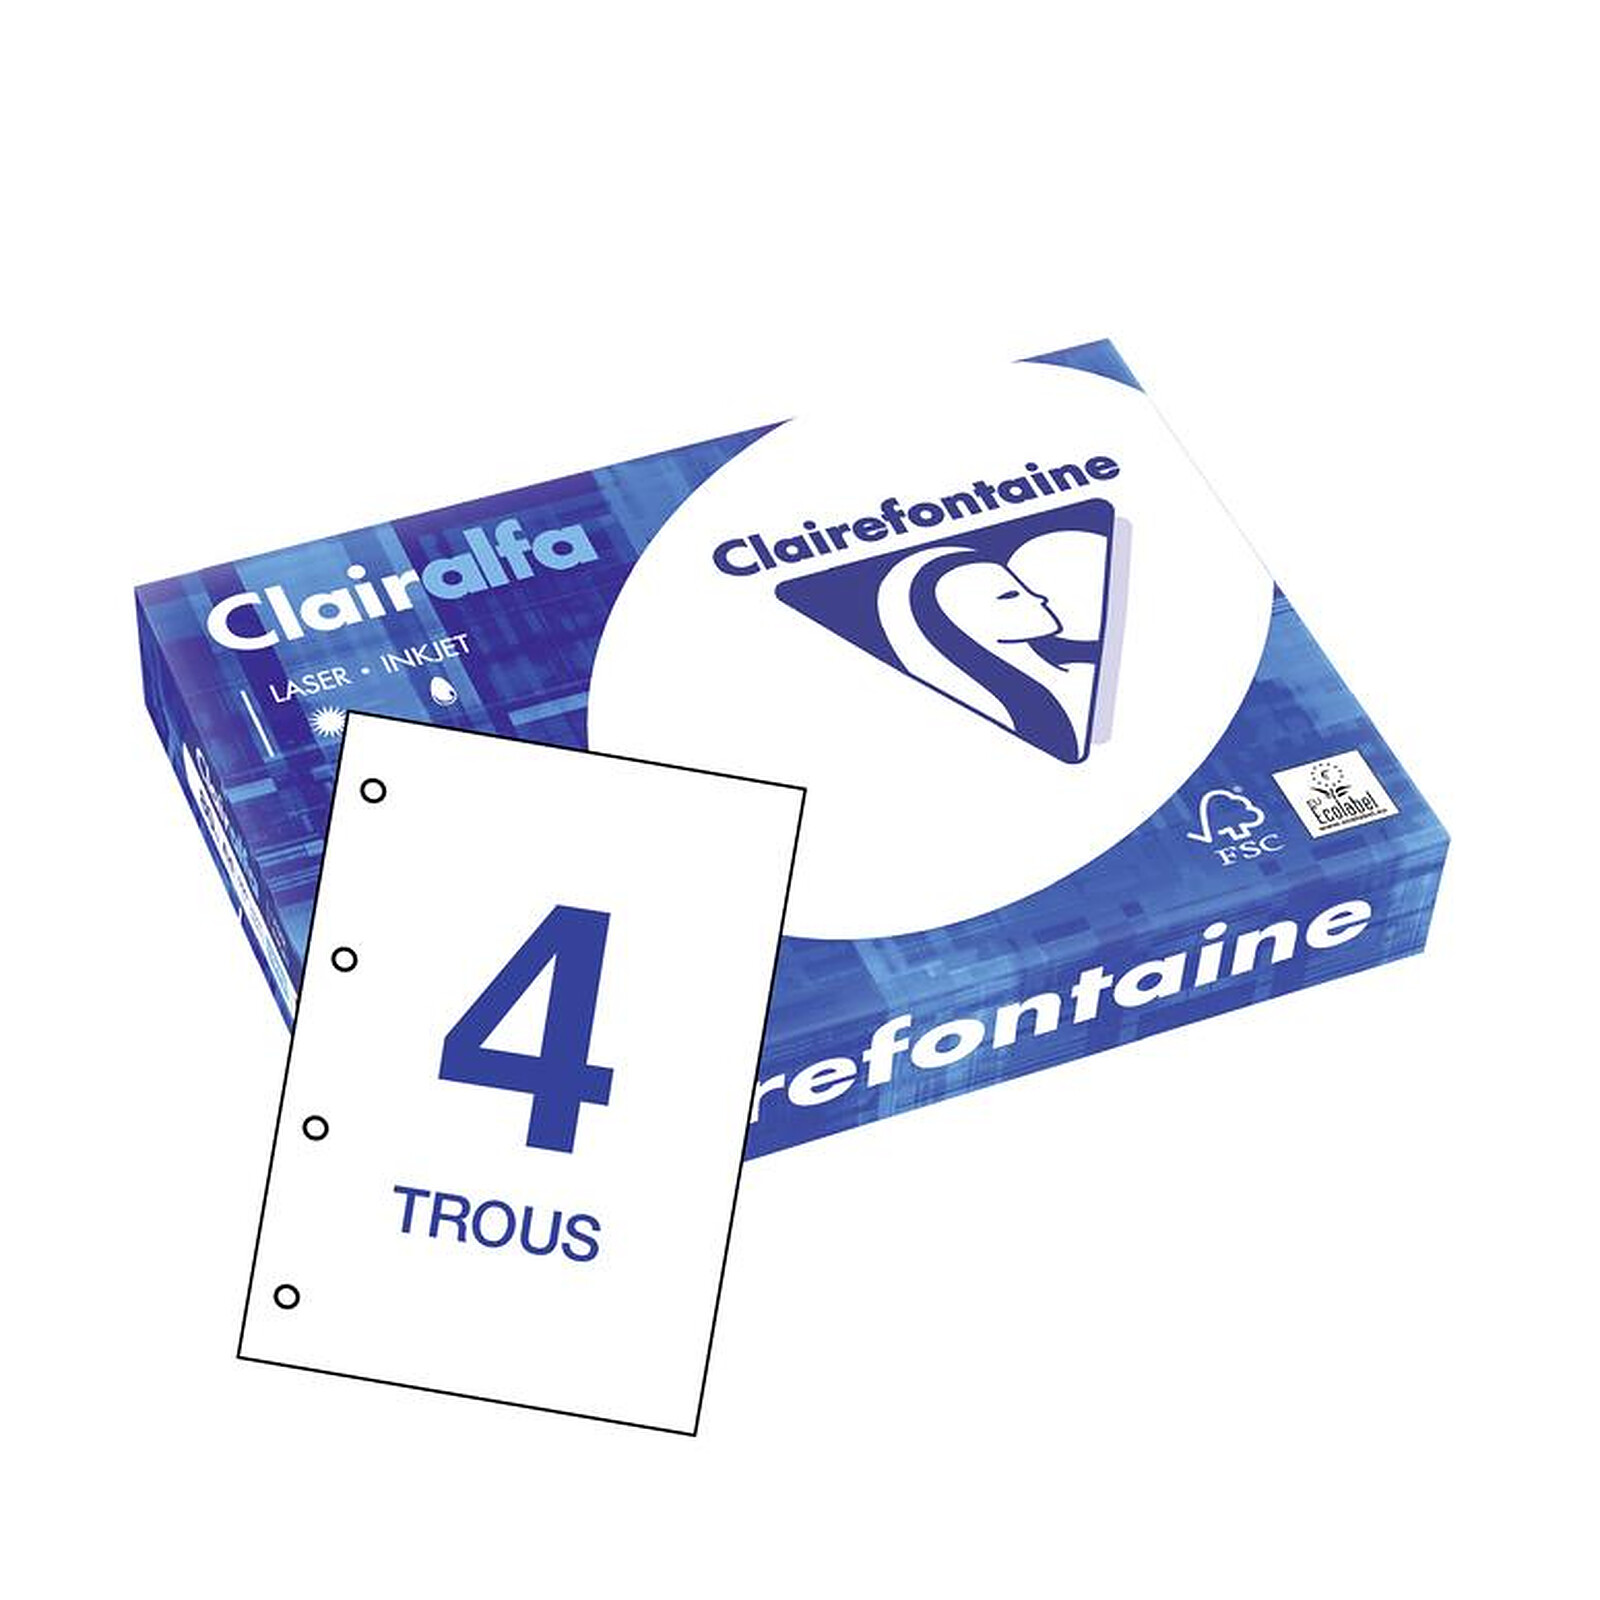 Clairefontaine Clairalfa 80g A4 ramette 500 feuilles Blanc X5